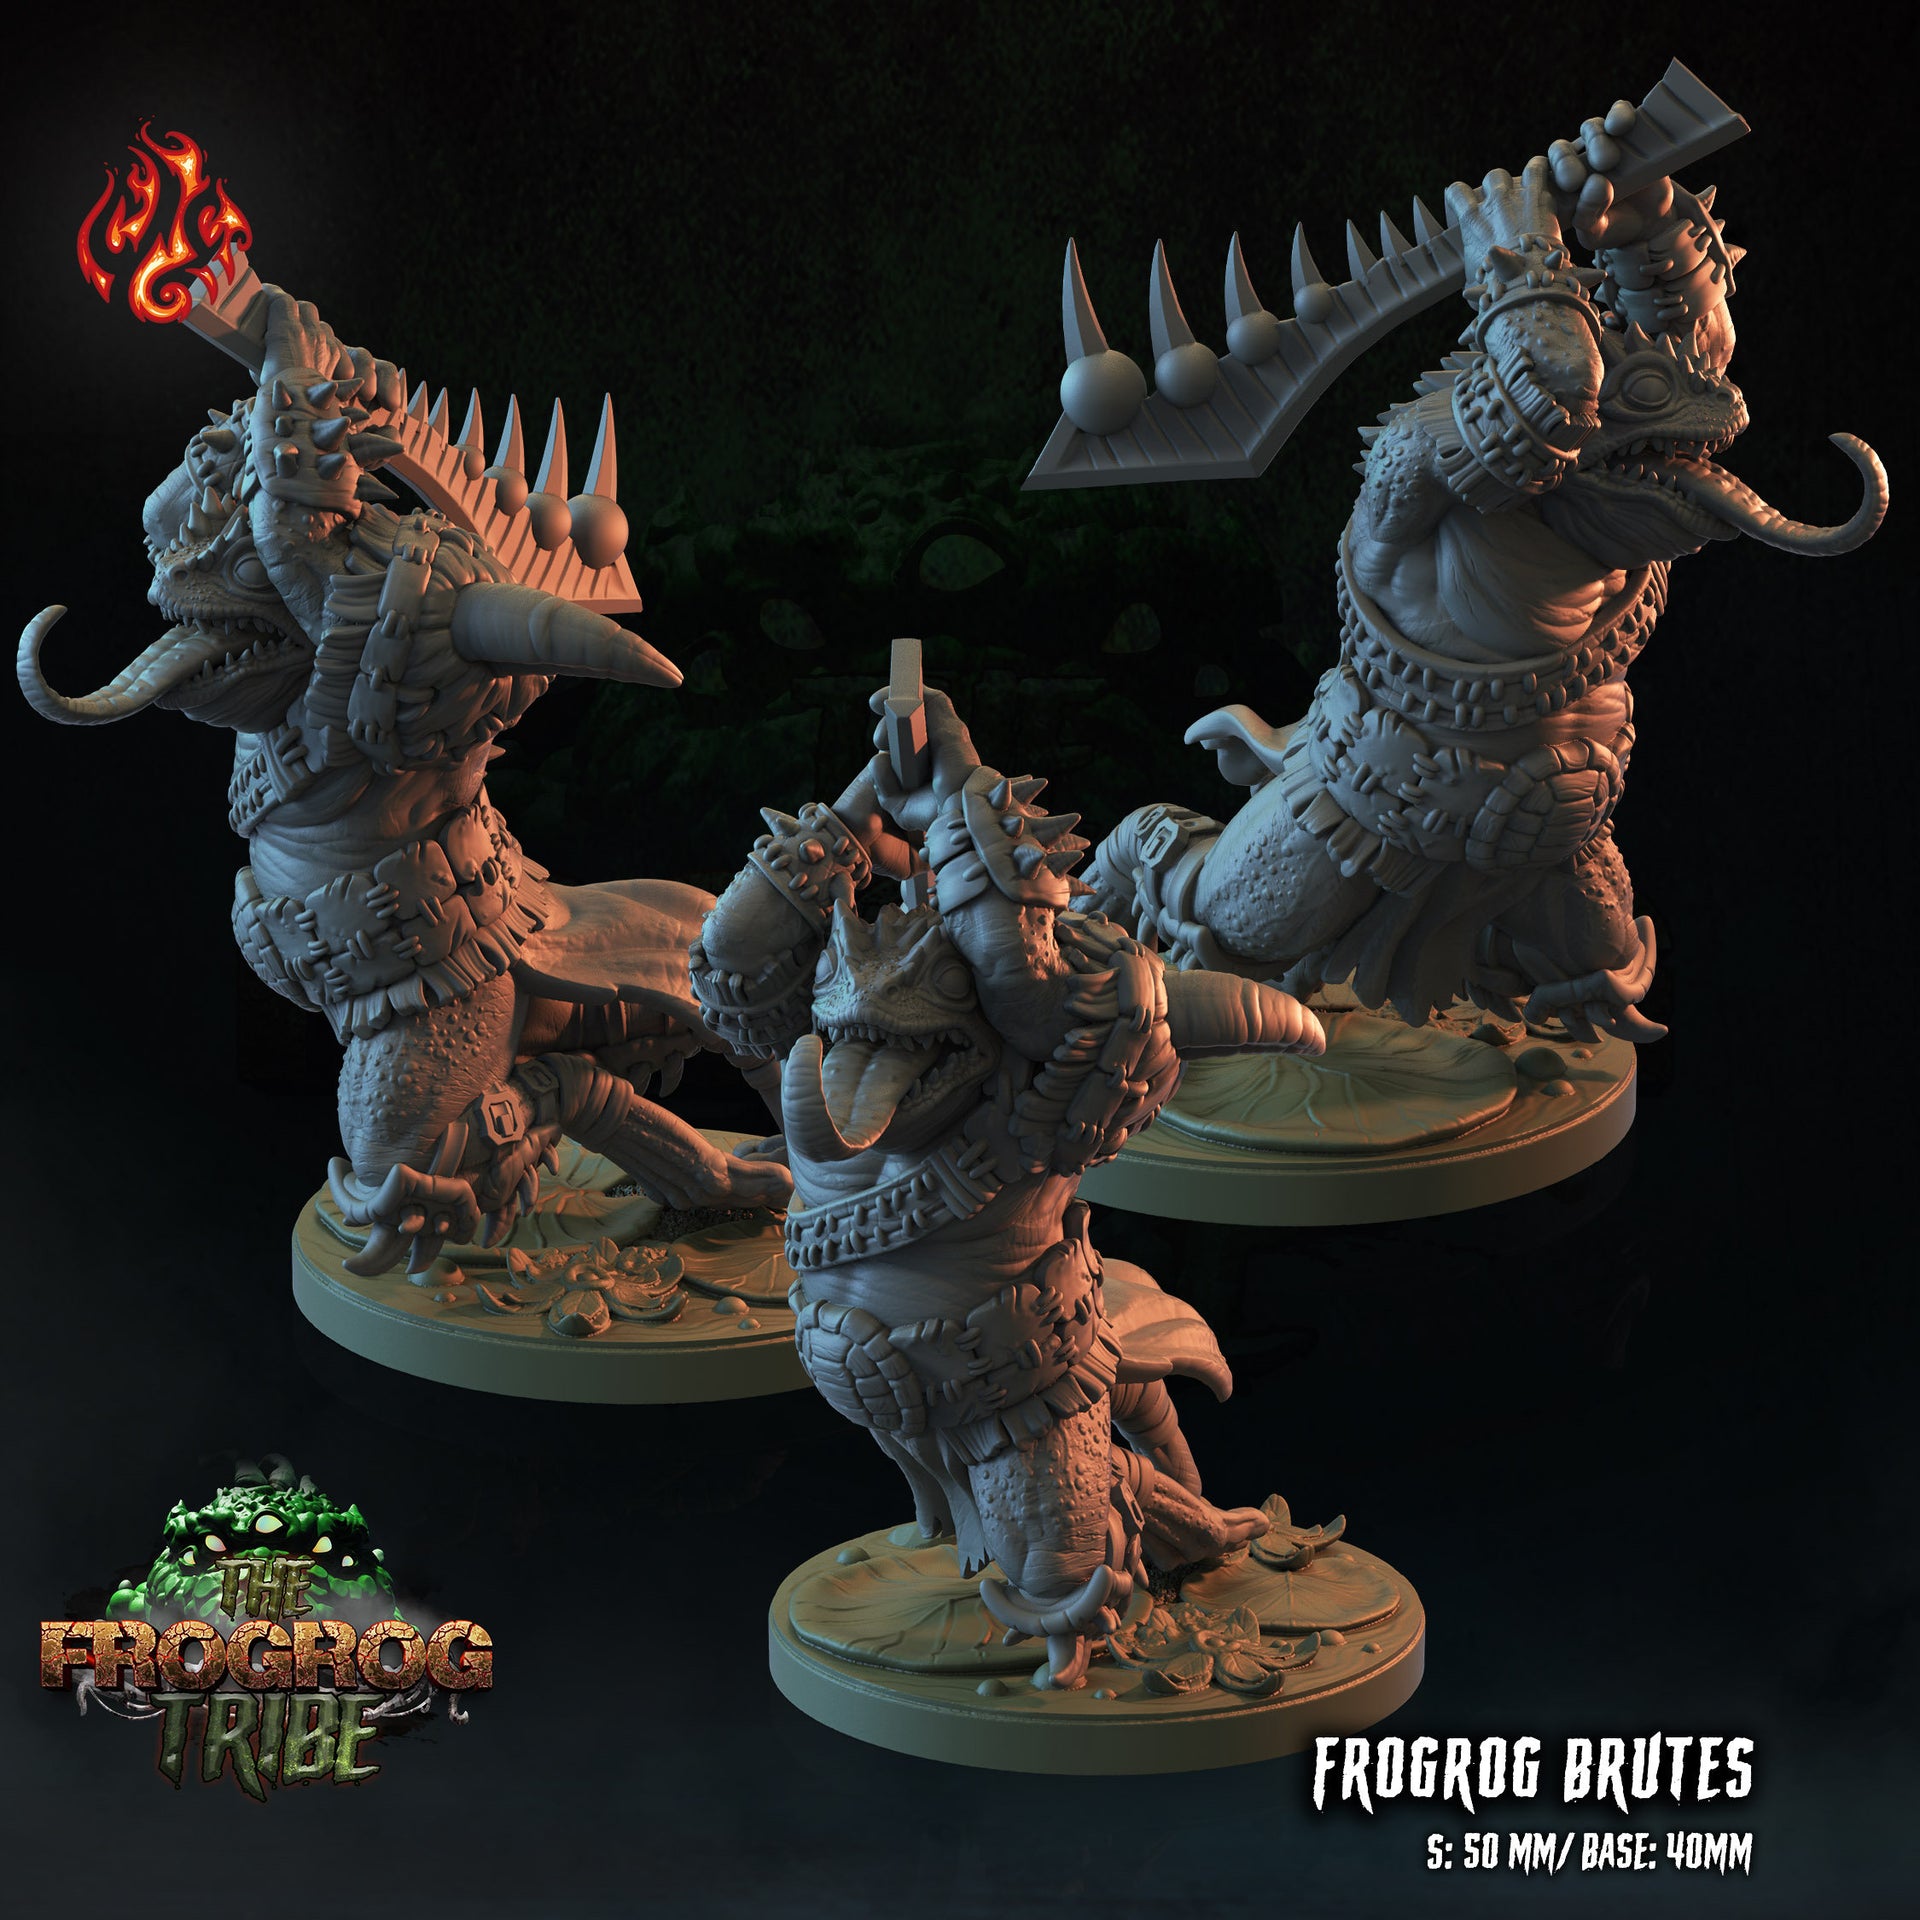 Frogfrog Brutes - Crippled God Foundry - Frogrog Tribe | D&D | 32mm | Lizardfolk | Toad | Frog | Barbarian